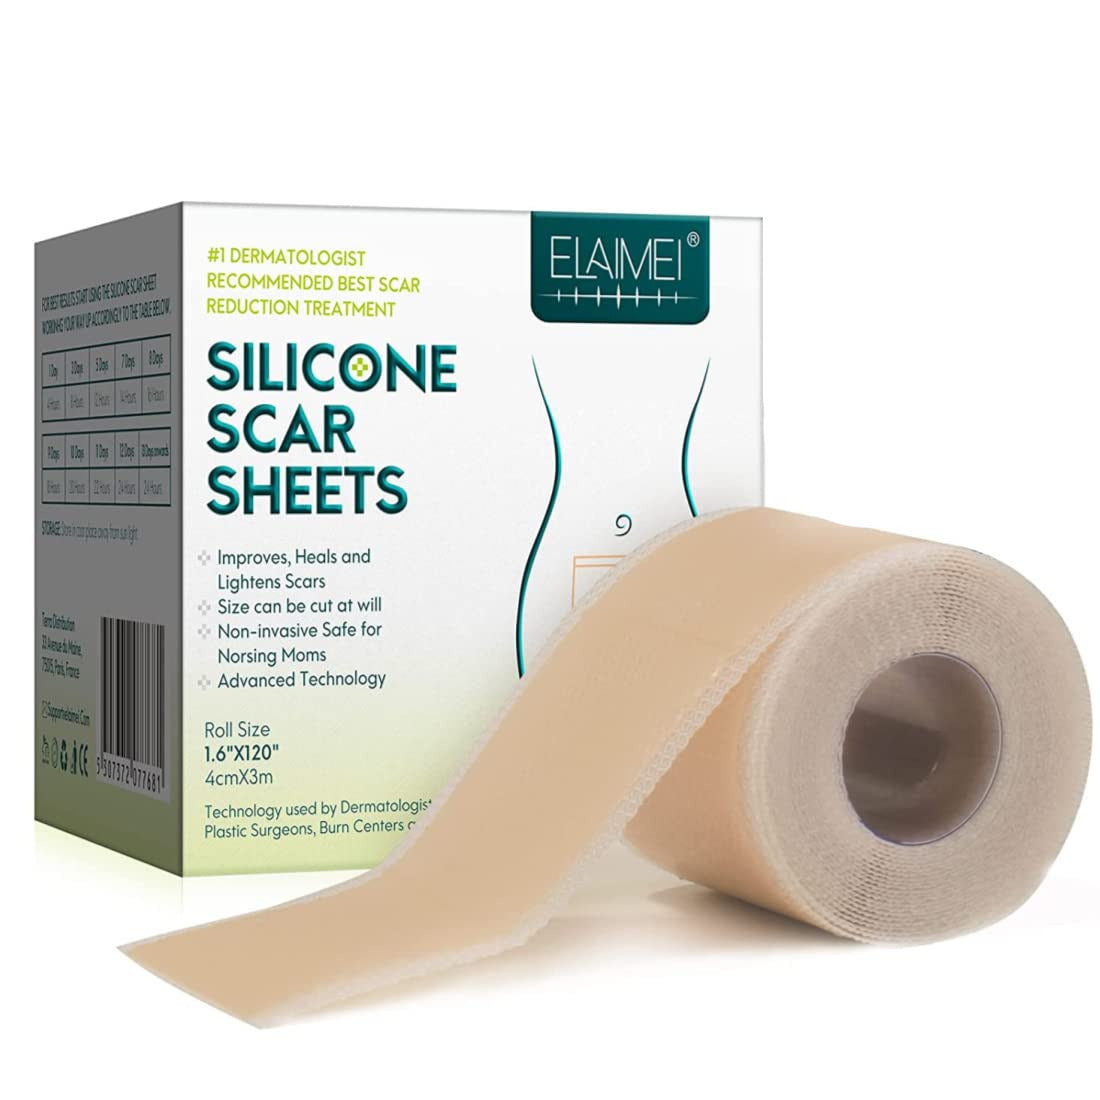 Silicone sheets 16x24 for DTG Curing - 250 per pack - SPSI Inc.